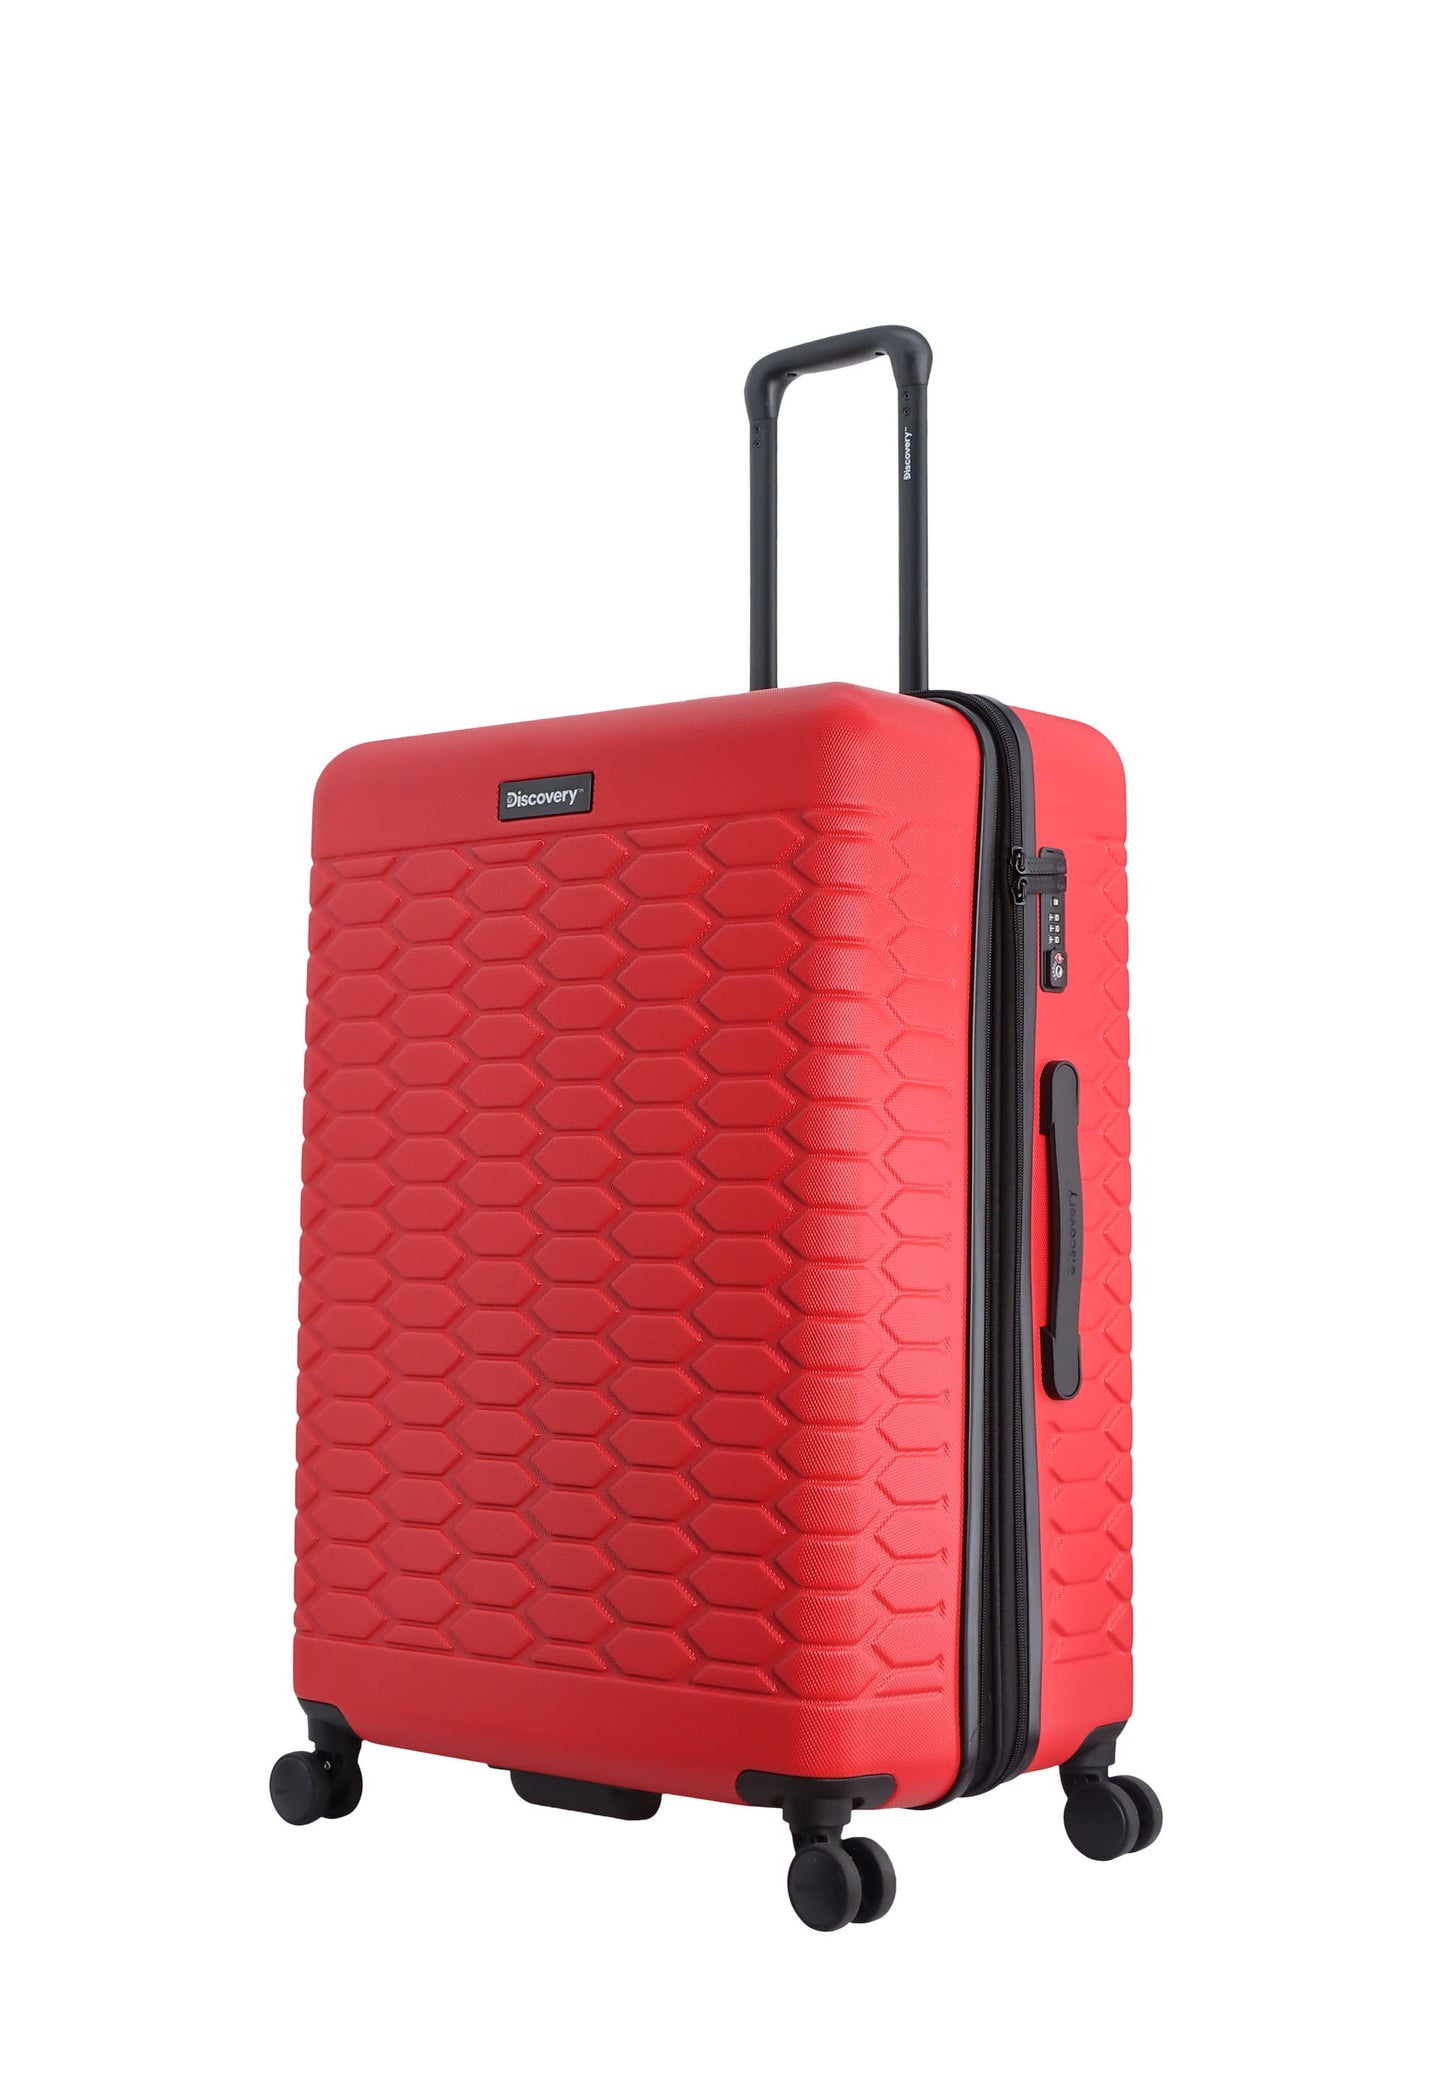 Discovery Reptile Harde Koffer / Trolley / Reiskoffer - 77 cm (Large) - Rood